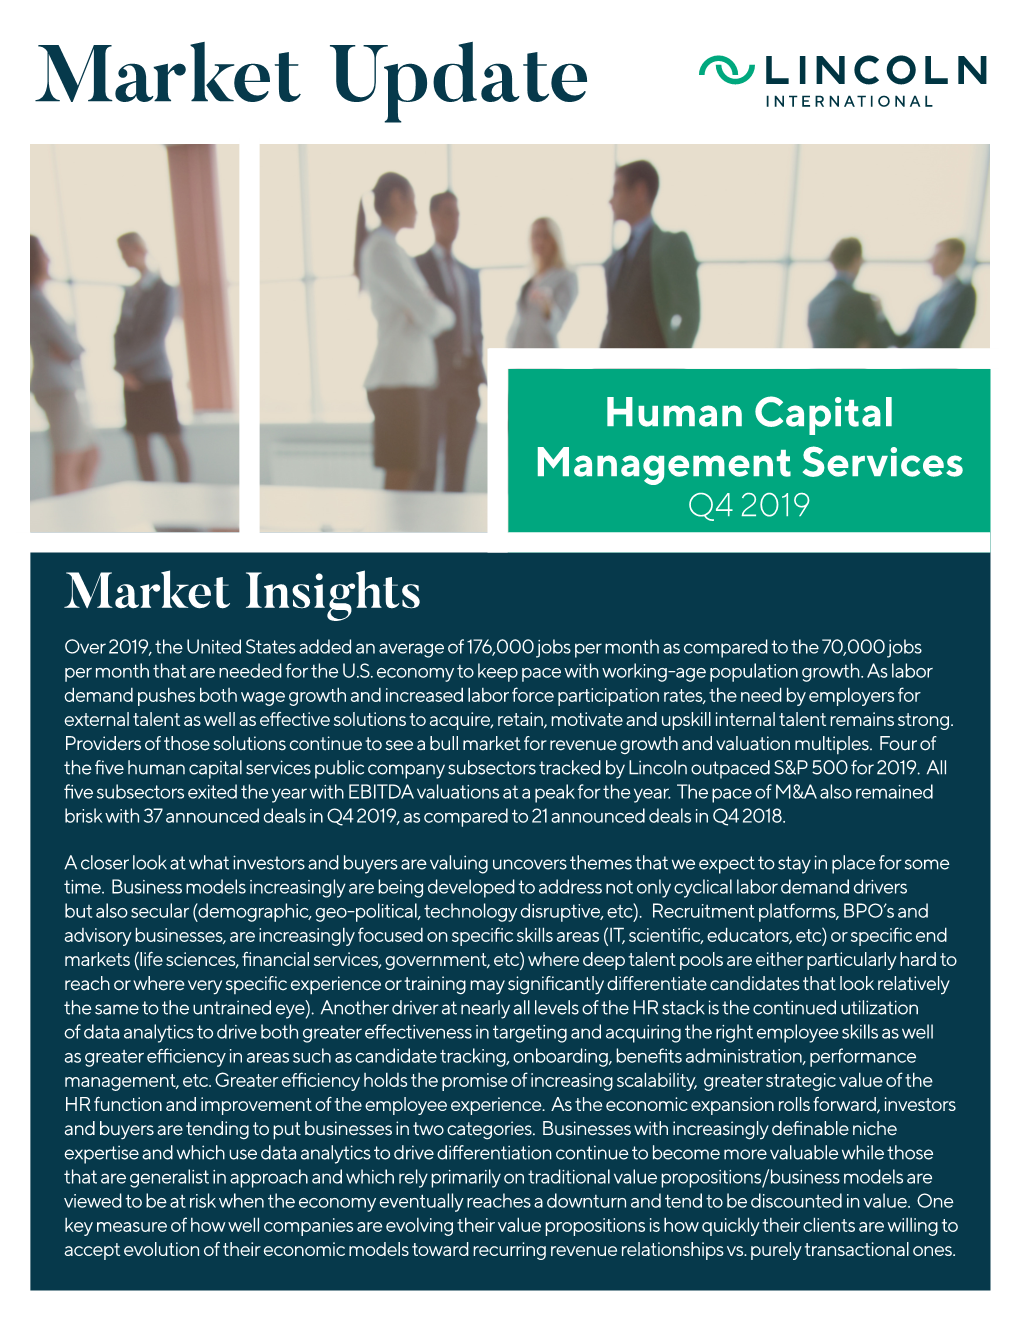 Human Capital Management Services Market Update Q4 2019 | 2 Highlights Quarter-Over-Quarter & Year Over Year Stock Indices Price Change